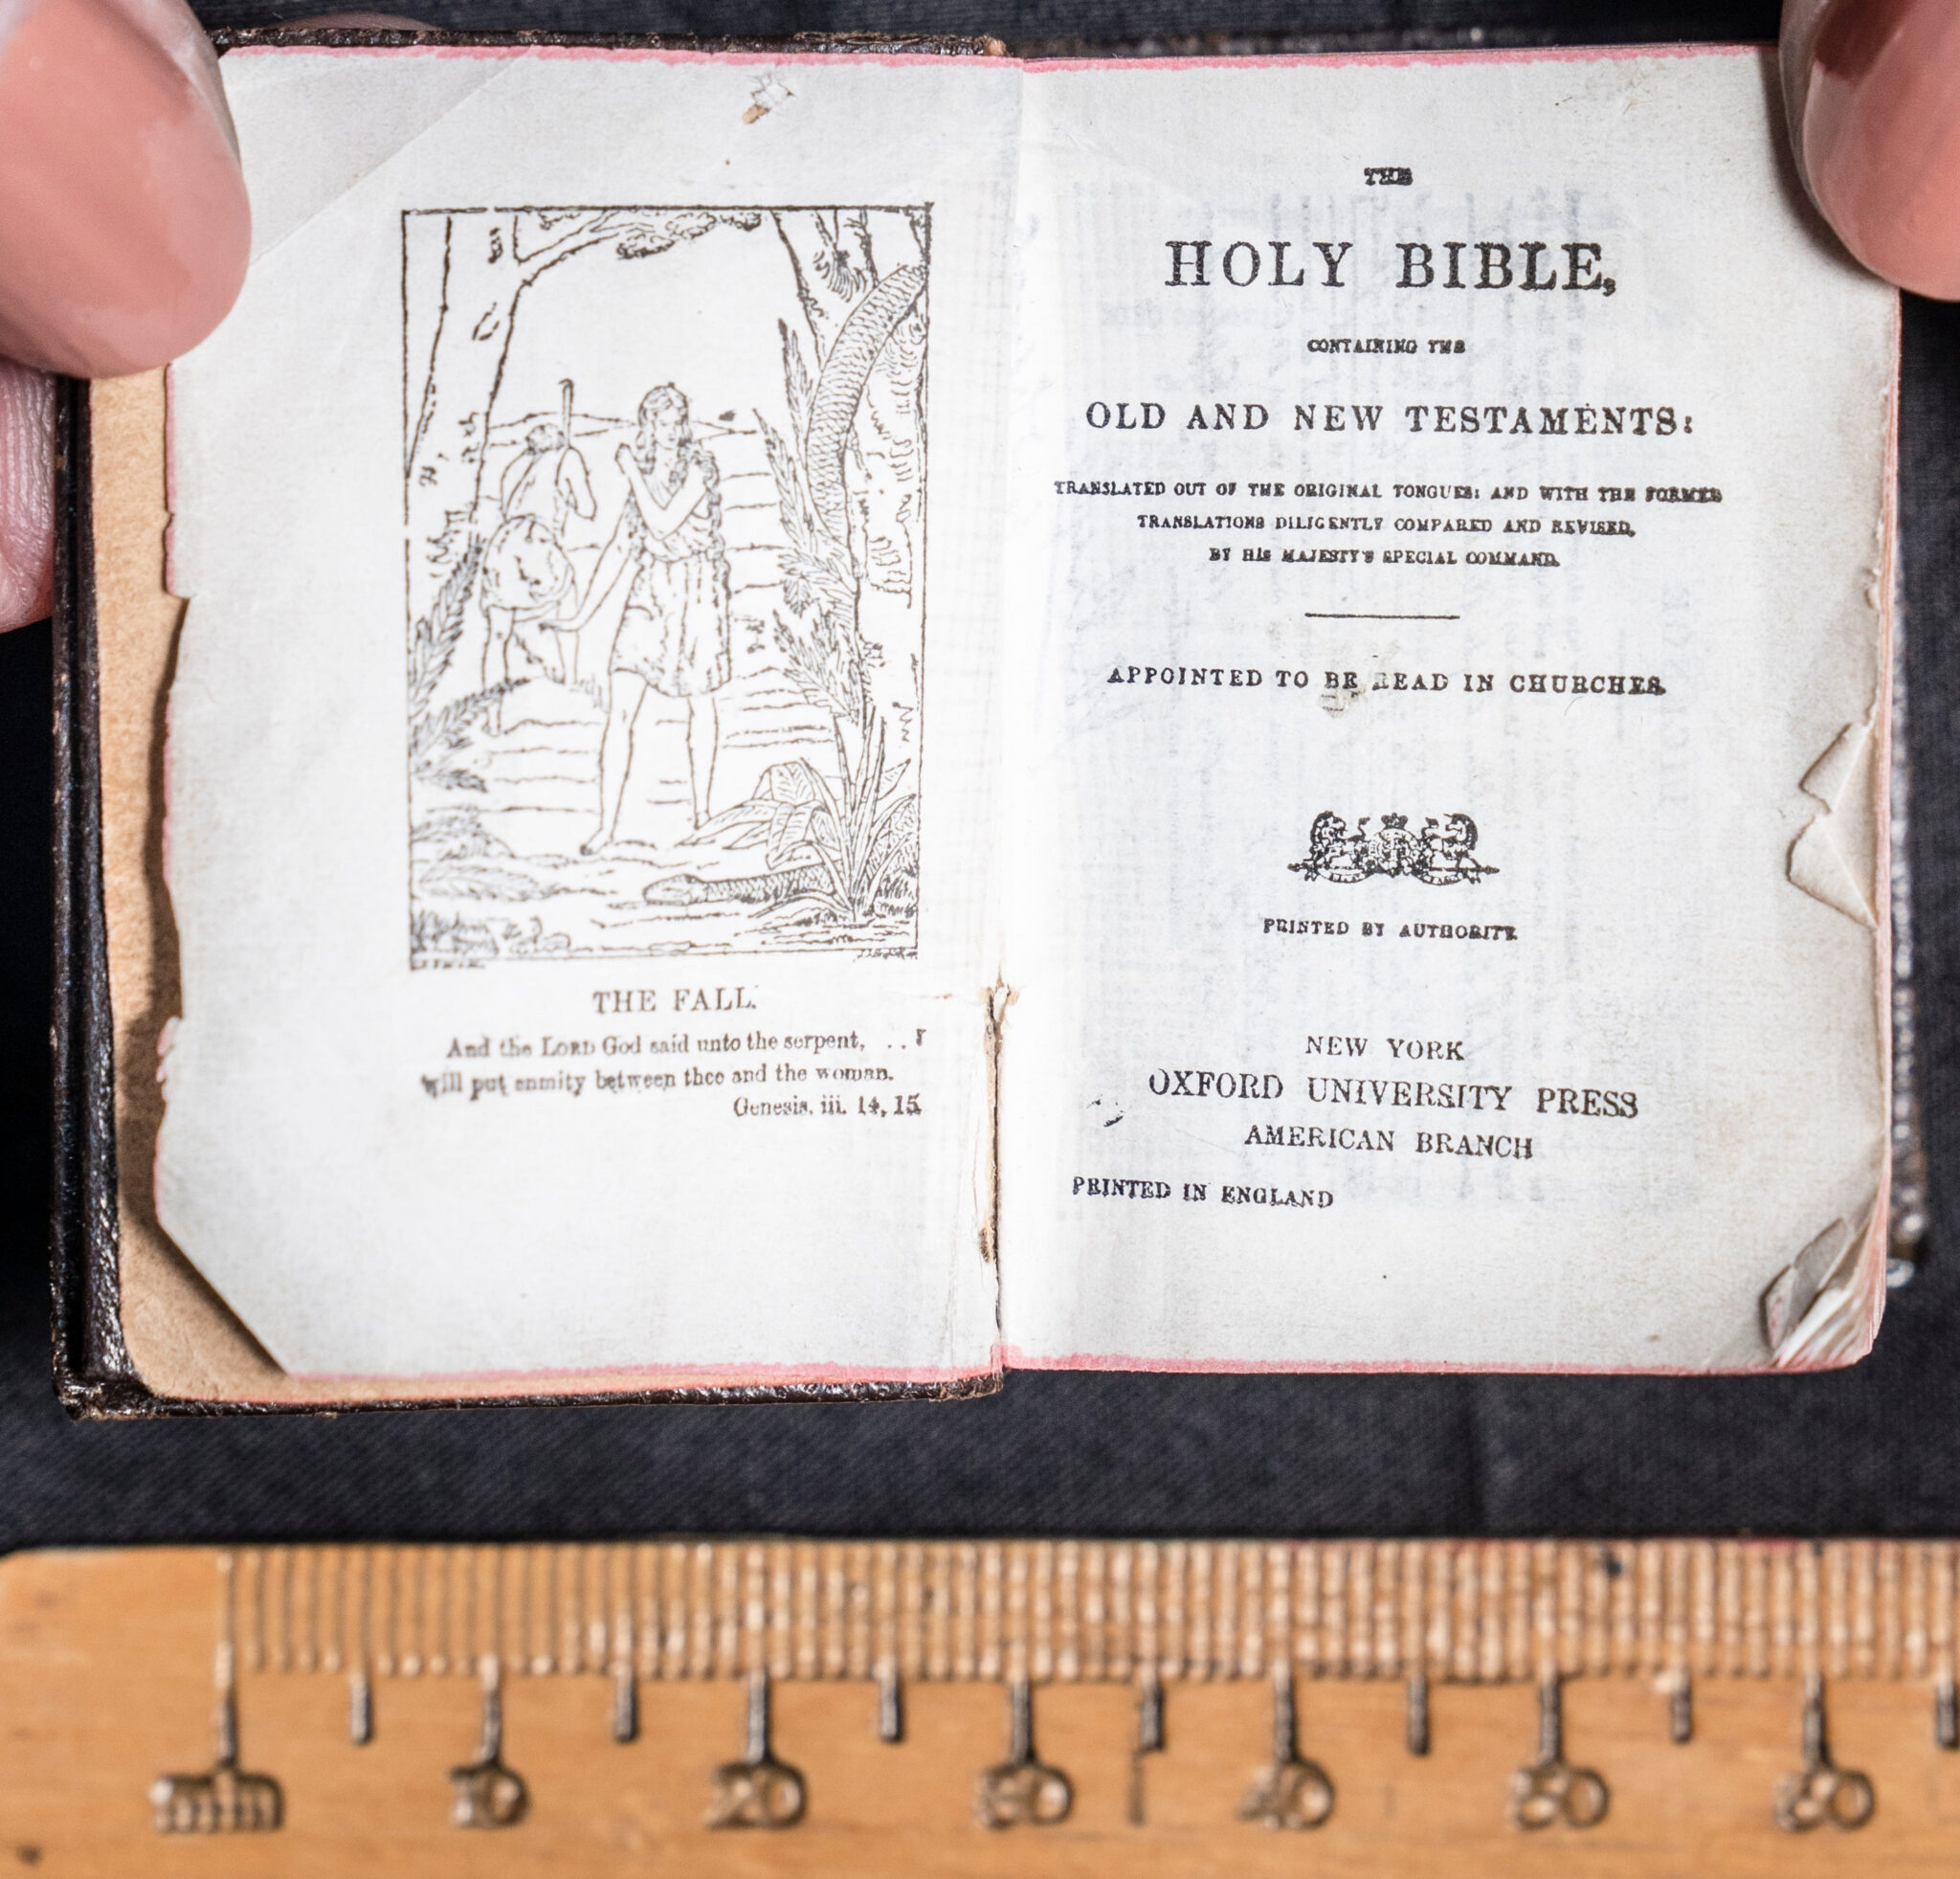 Tiny Bible found in Leeds Central Library